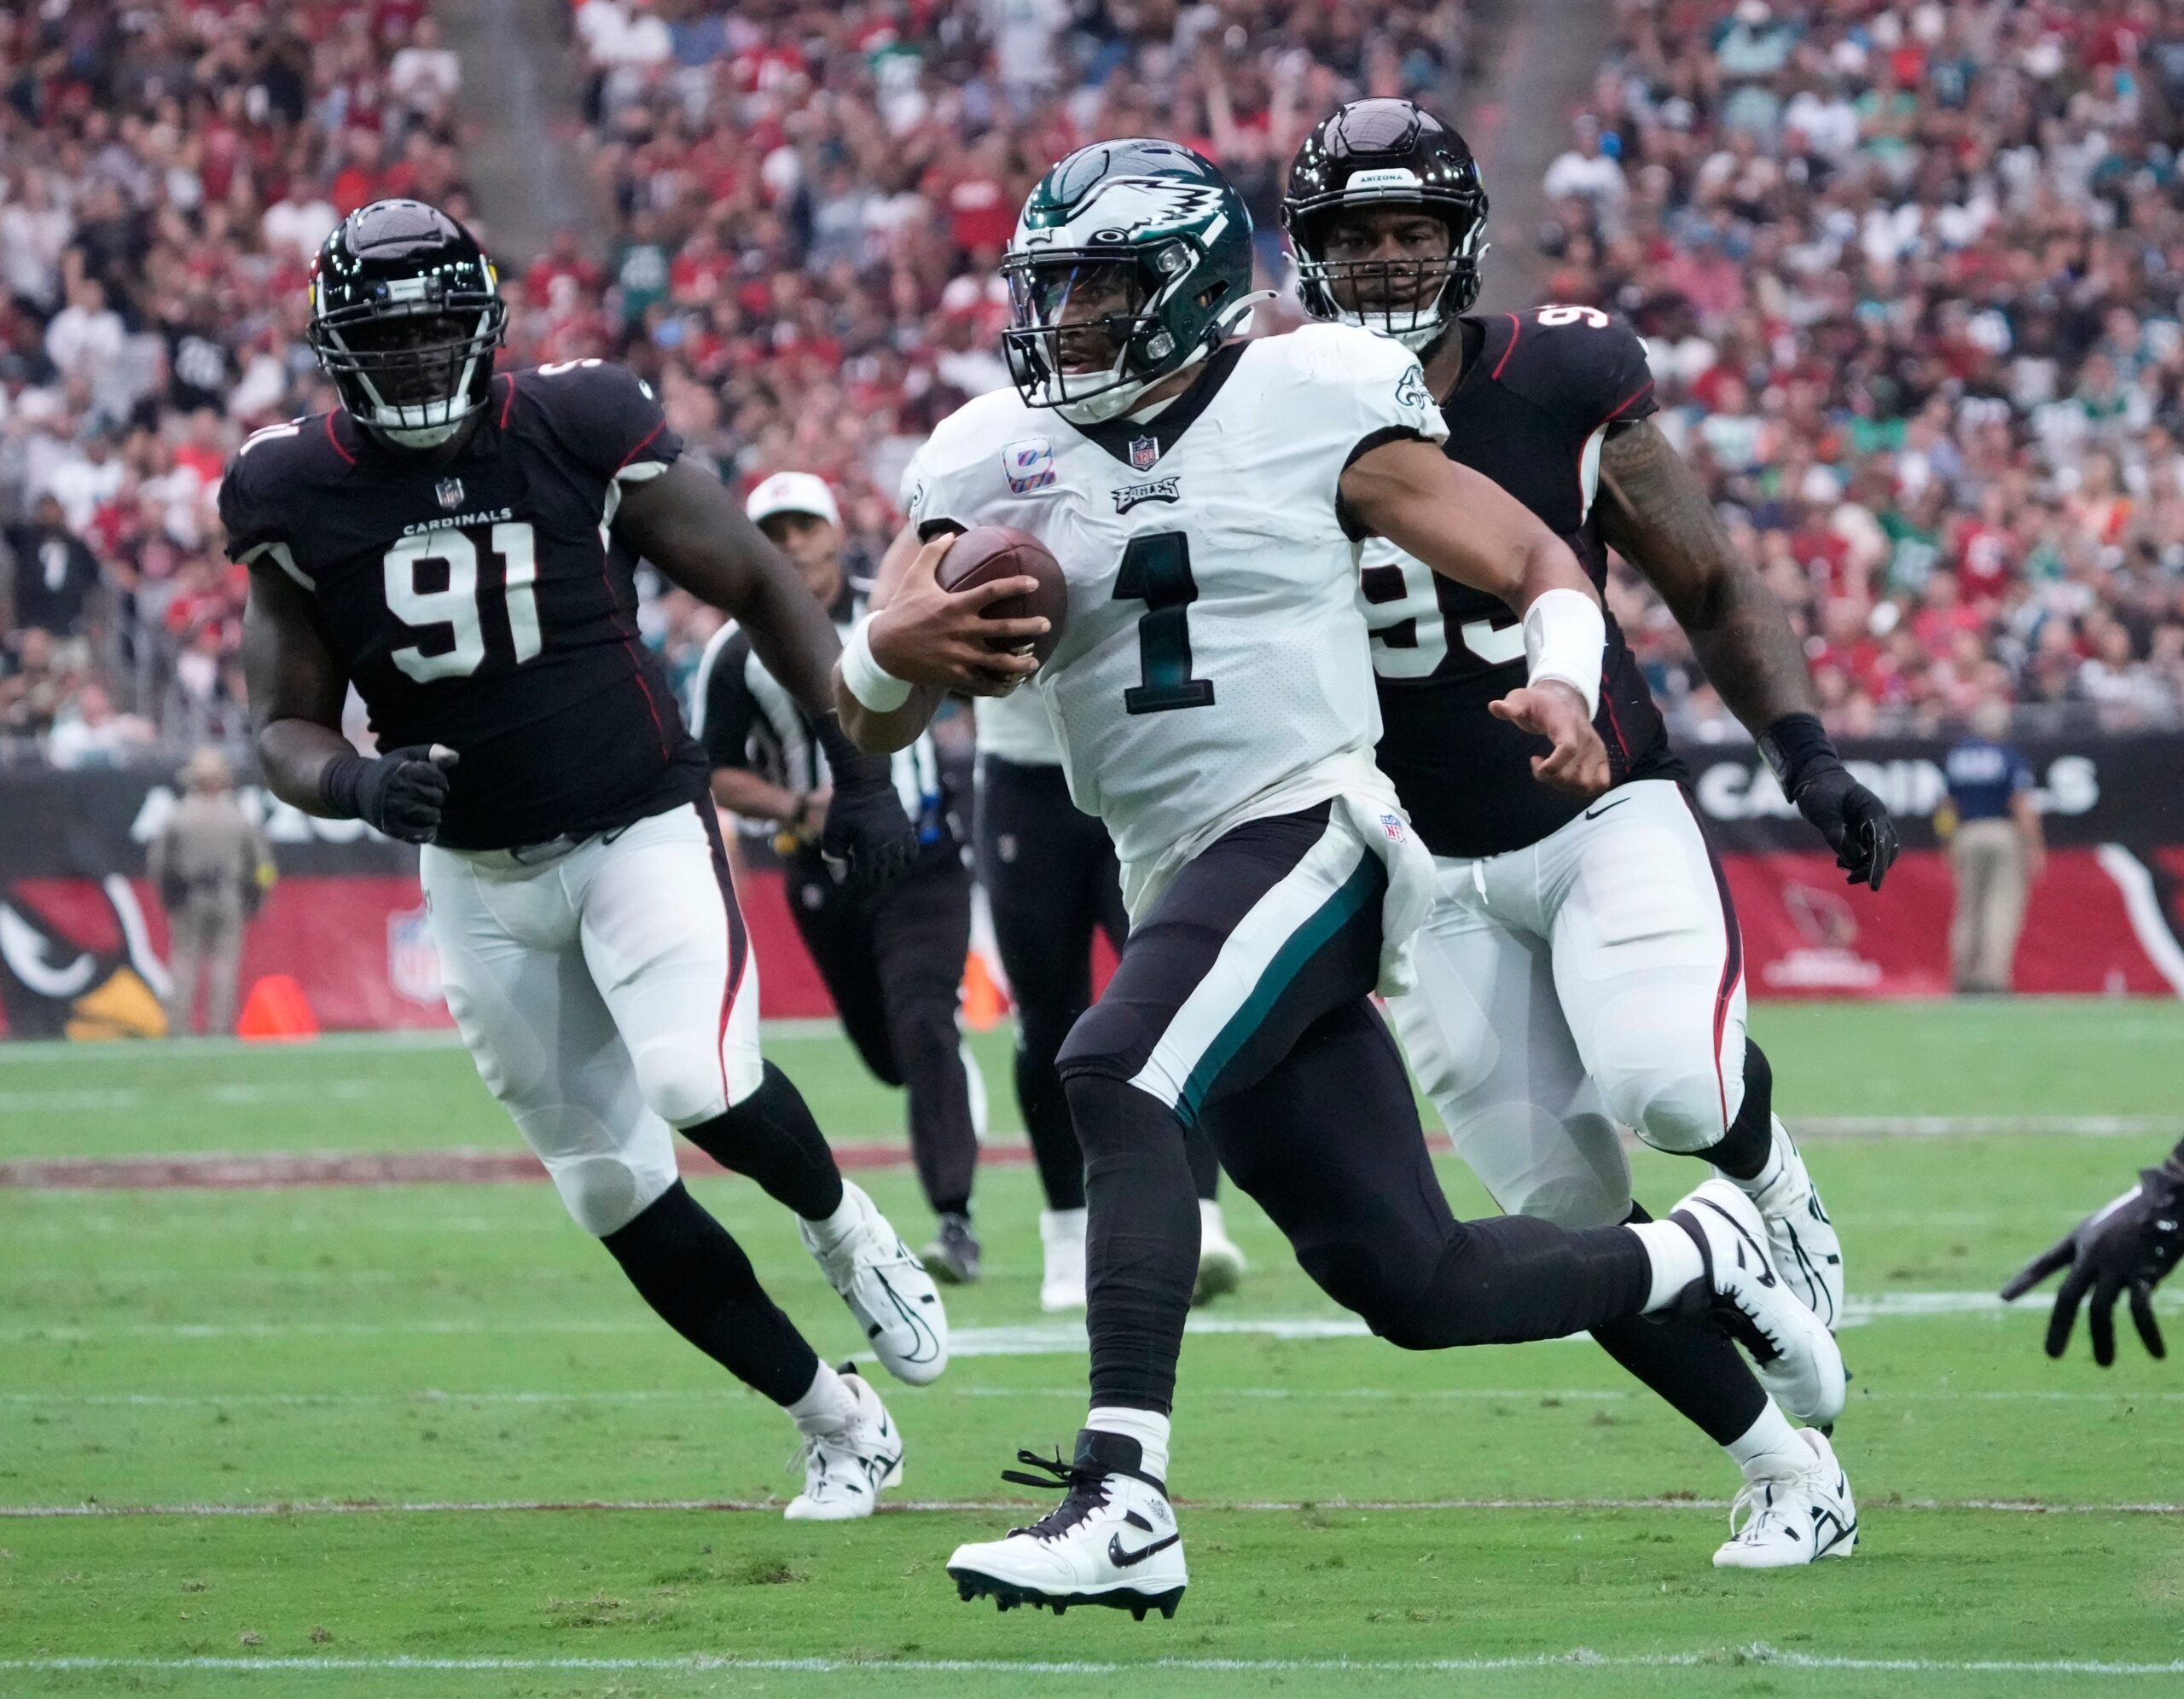 Eagles vs. Cowboys DFS Lineup for Sunday Night Football: All In on Jalen  Hurts, A.J. Brown, and DeVonta Smith